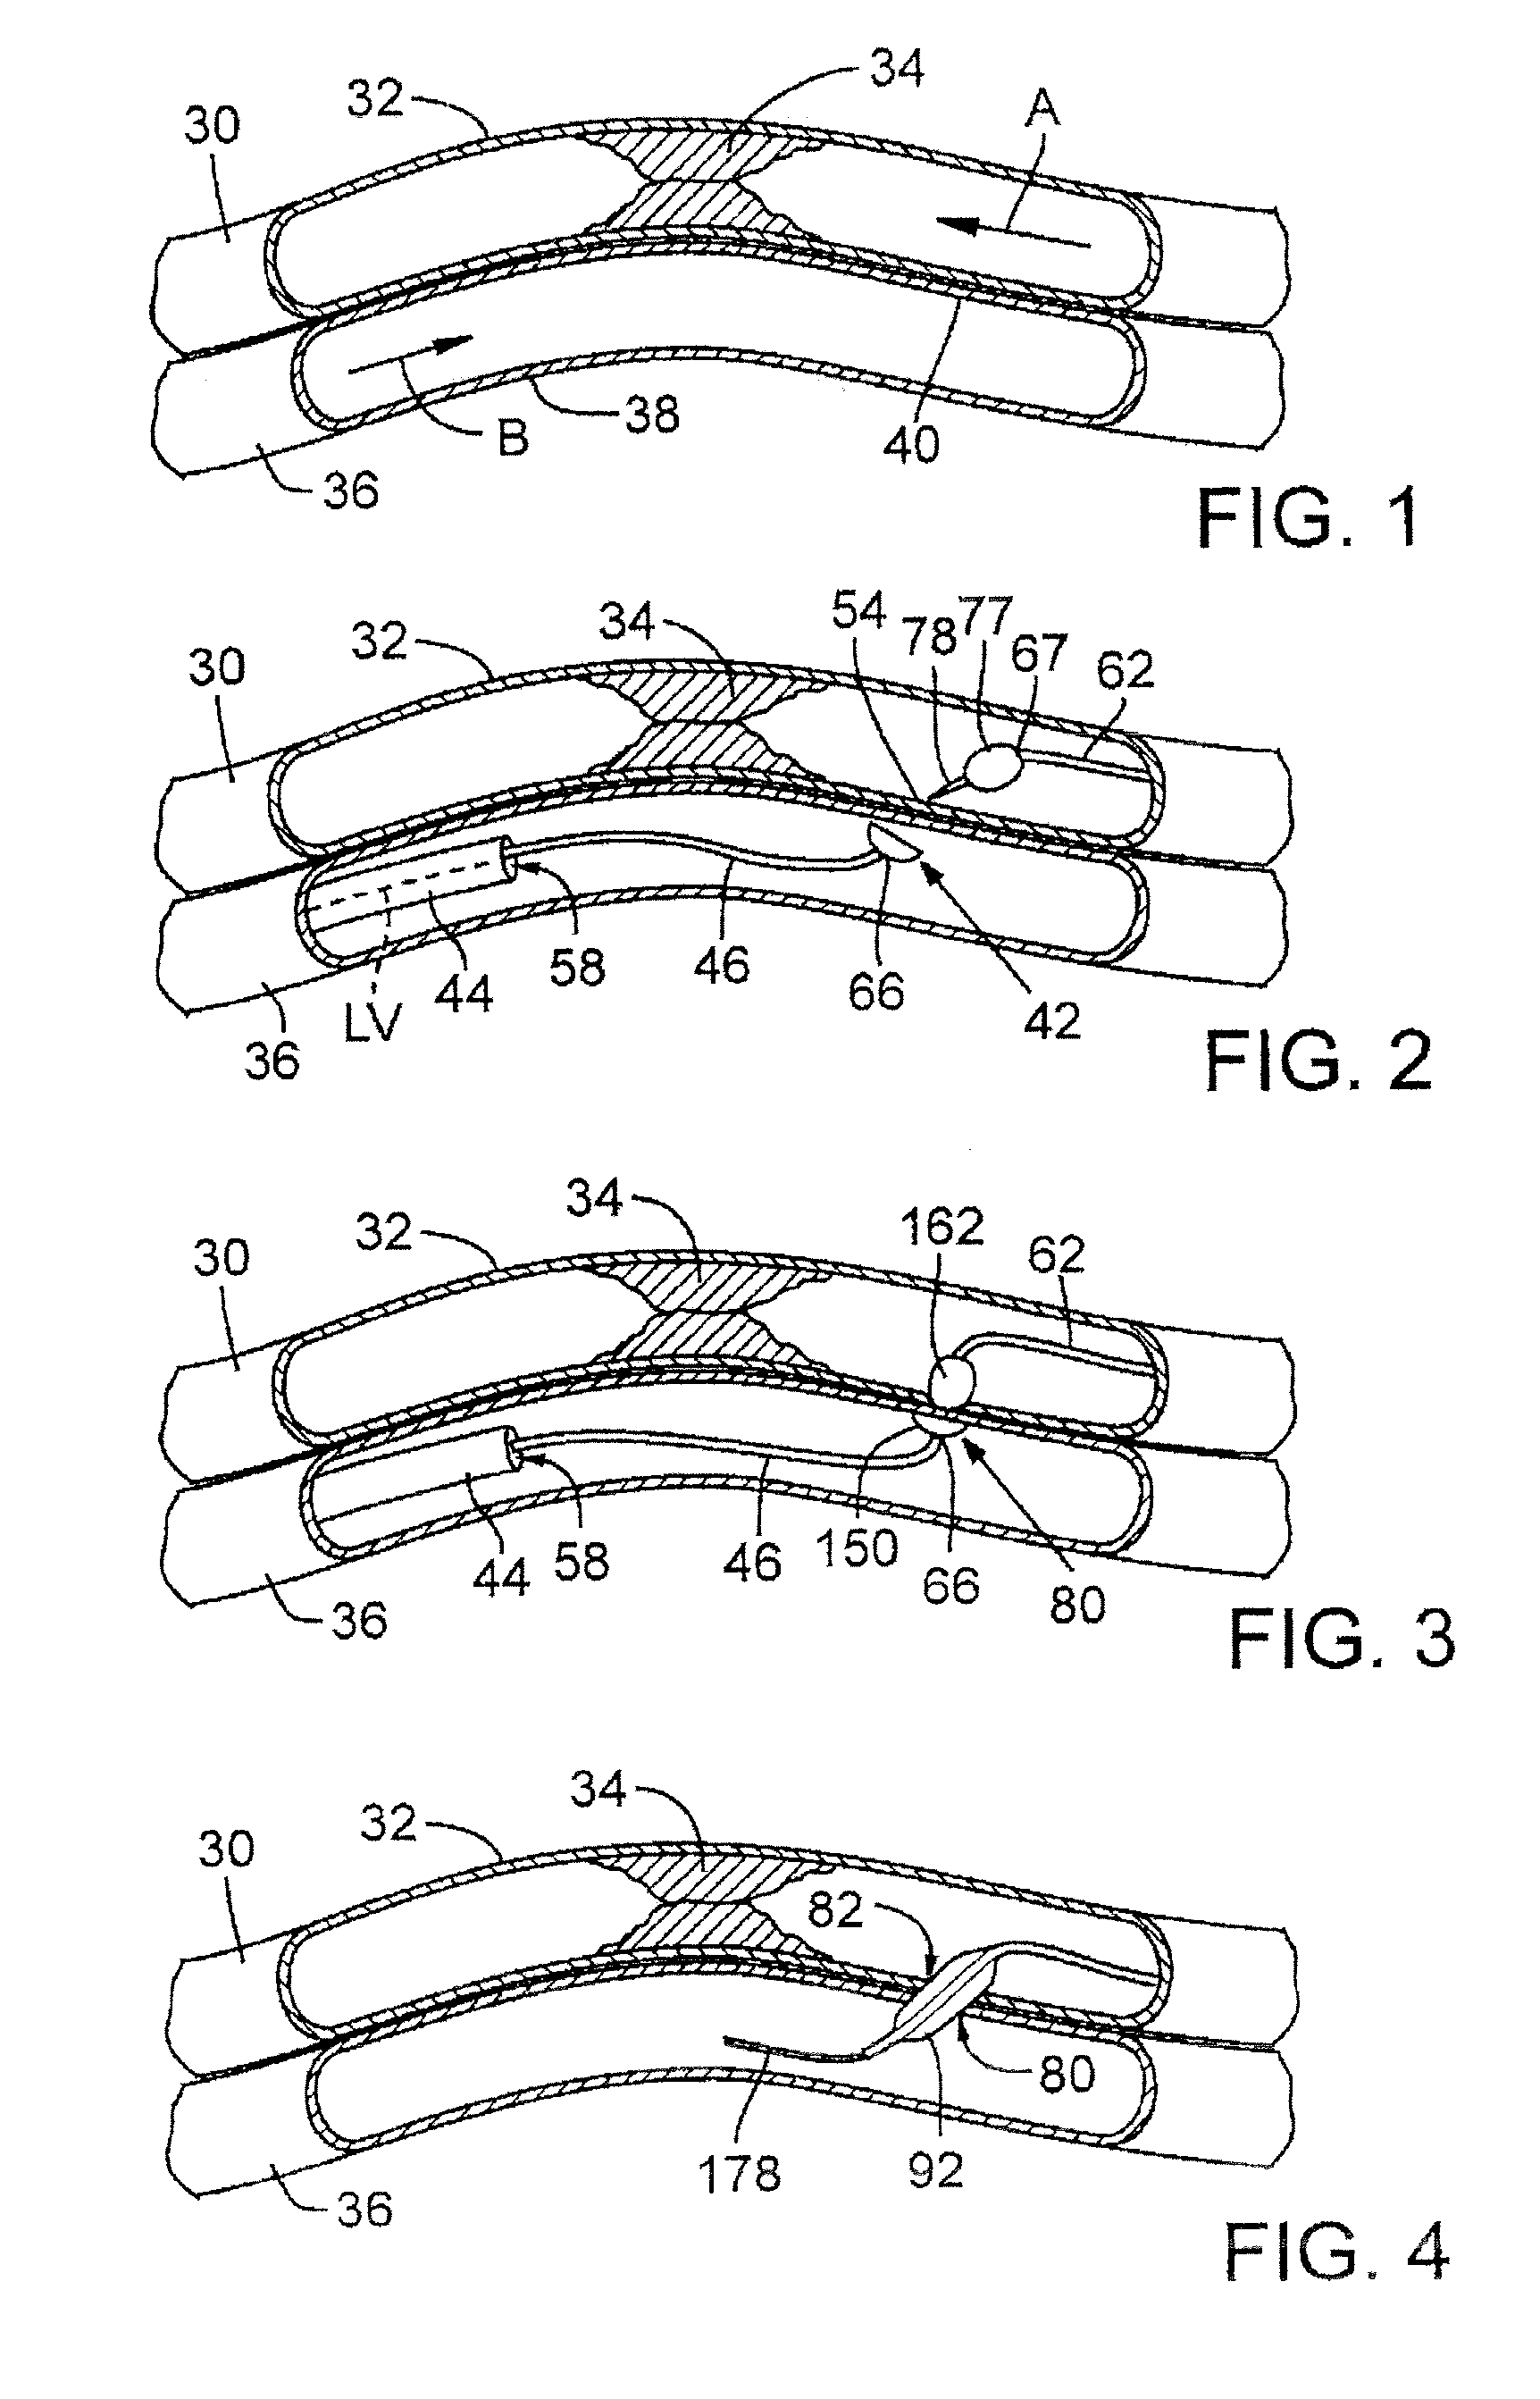 Catheter system with stent device for connecting adjacent blood vessels